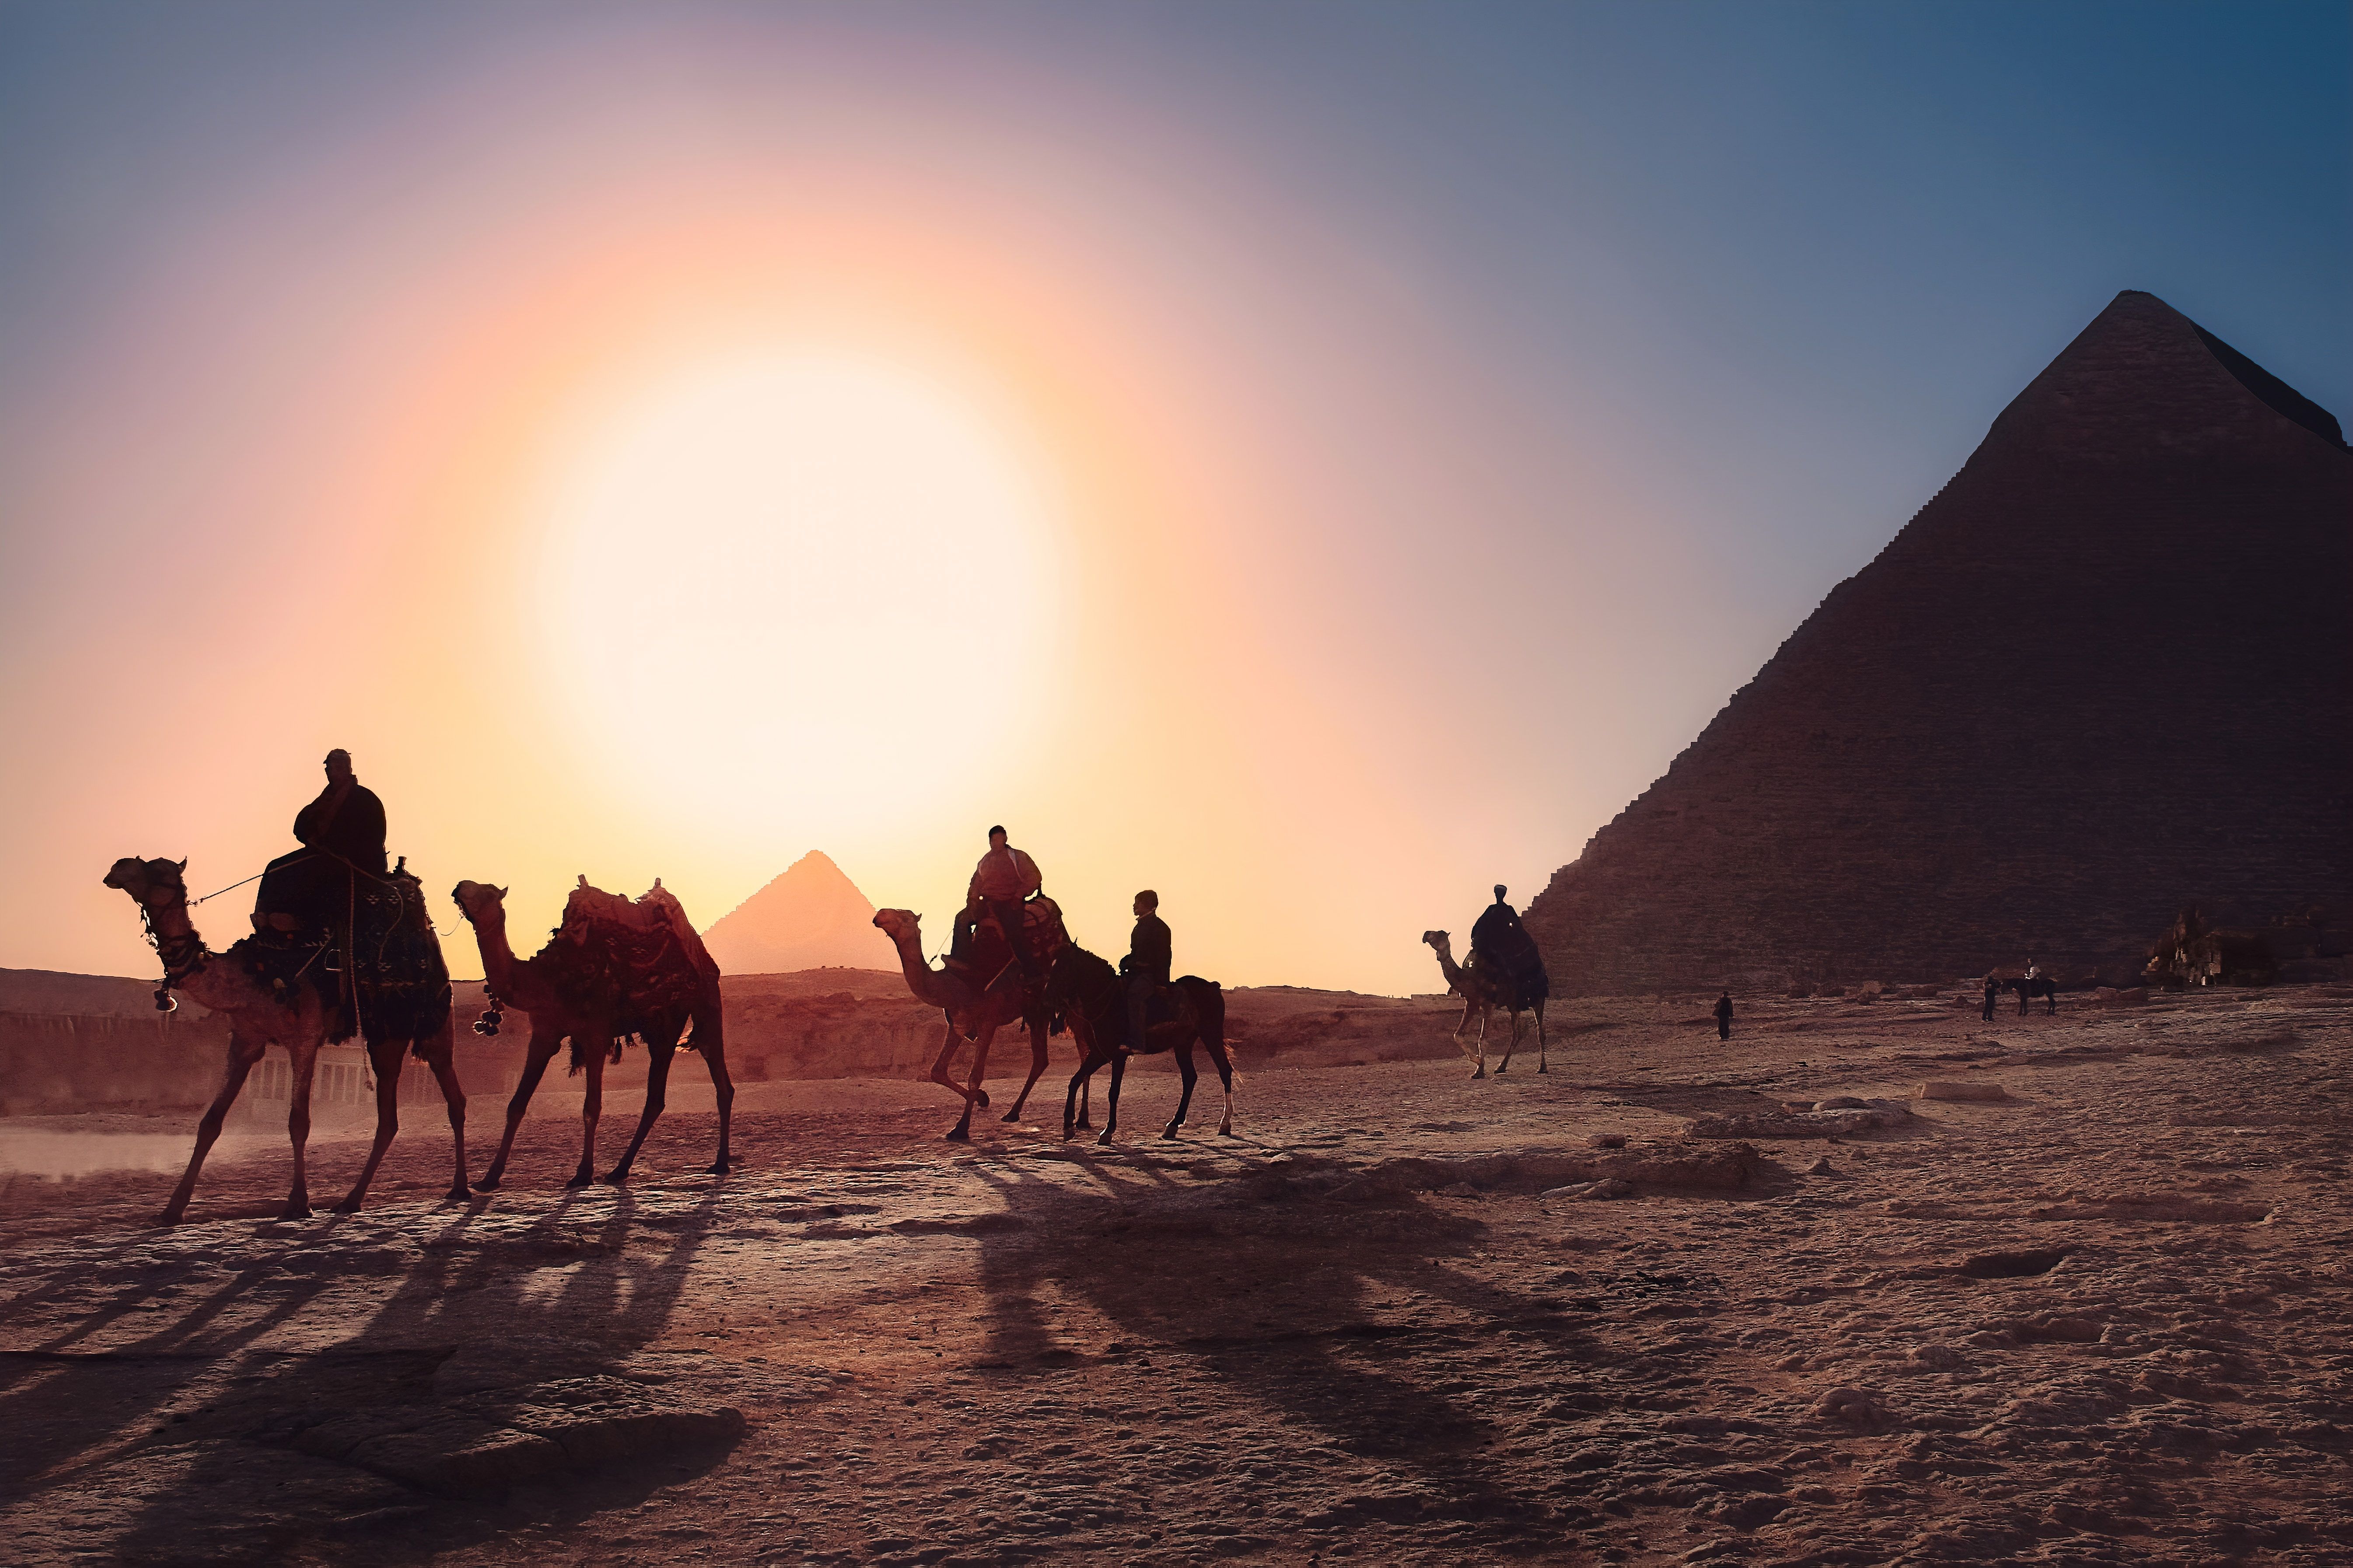 Group riding camels by the pyramids of Egypt